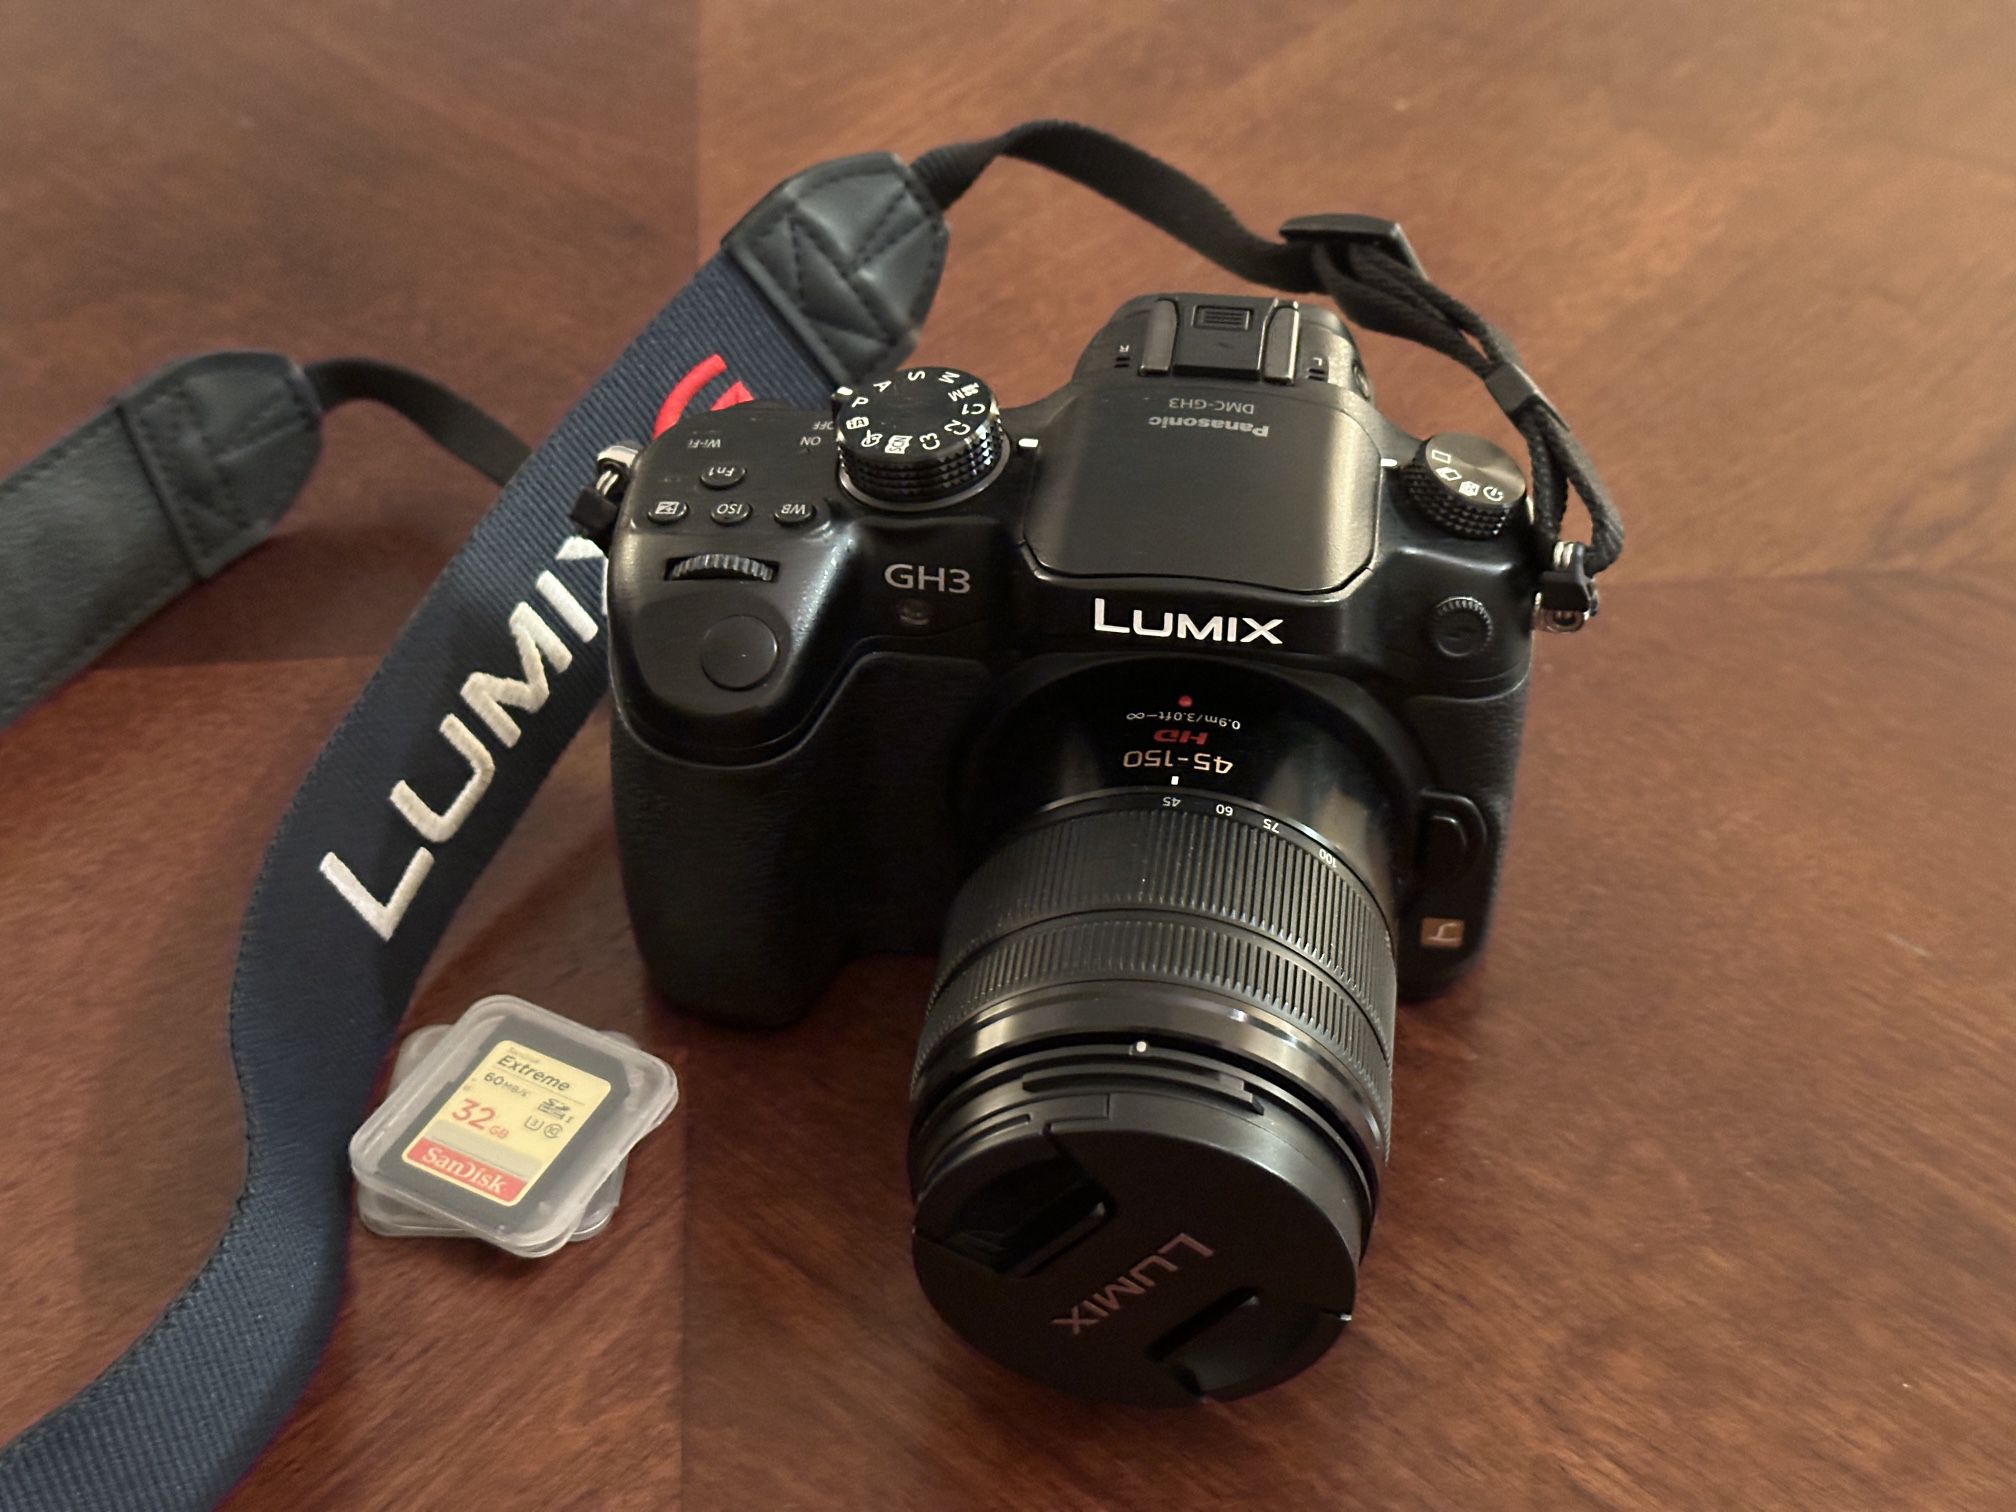 Panasonic Lumix GH3 with LENS and CASE - excellent condition